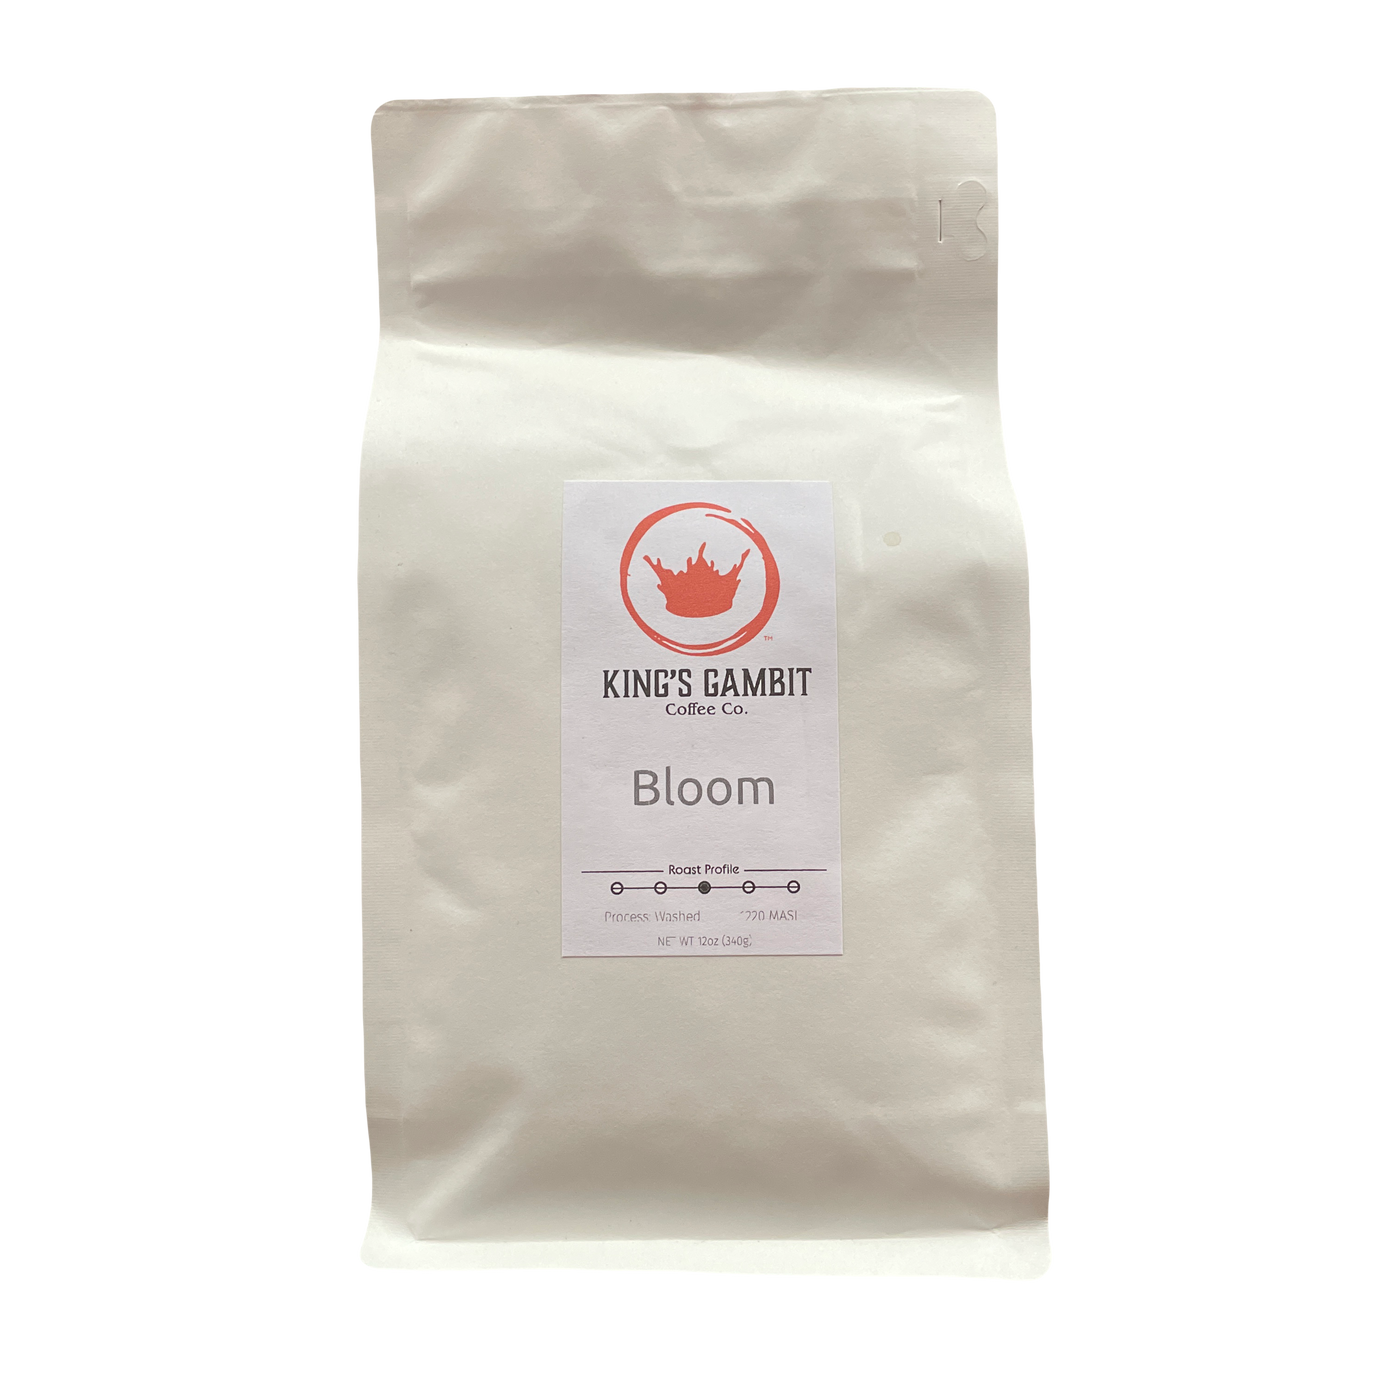 King’s Gambit Coffee Co. - Bloom (Whole Bean)